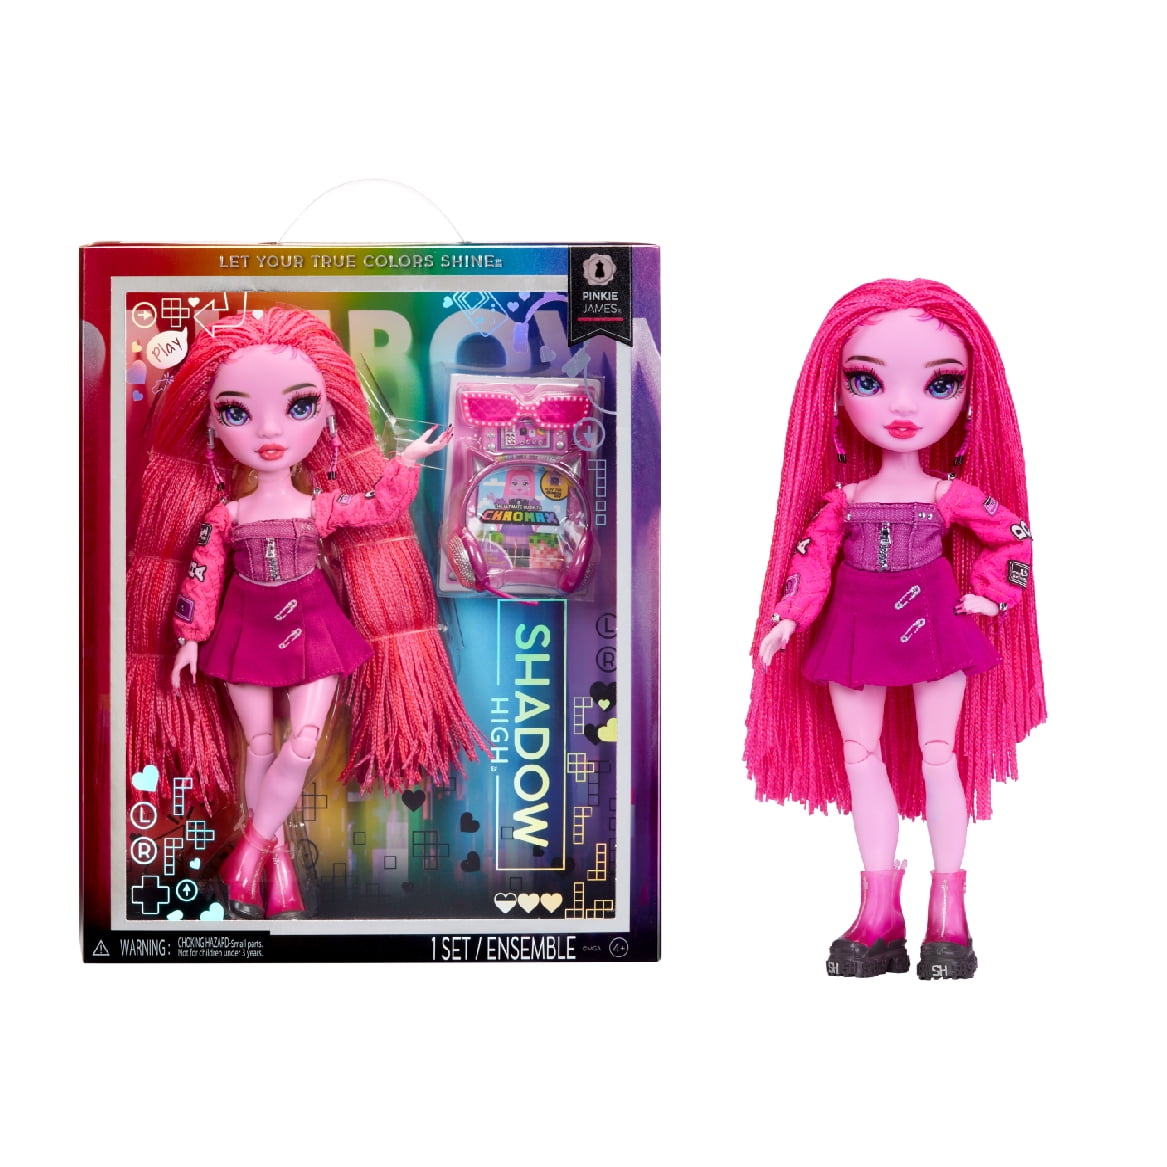  Rainbow High Rainbow Vision Rainbow Divas- Sabrina St. Cloud  (Rose-Quartz Pink) Posable Fashion Doll w/ 2 Designer Outfits Mix &  Match+Vanity Playset, Great Toy Gifts Kids 6-12 Years Old & Collectors 